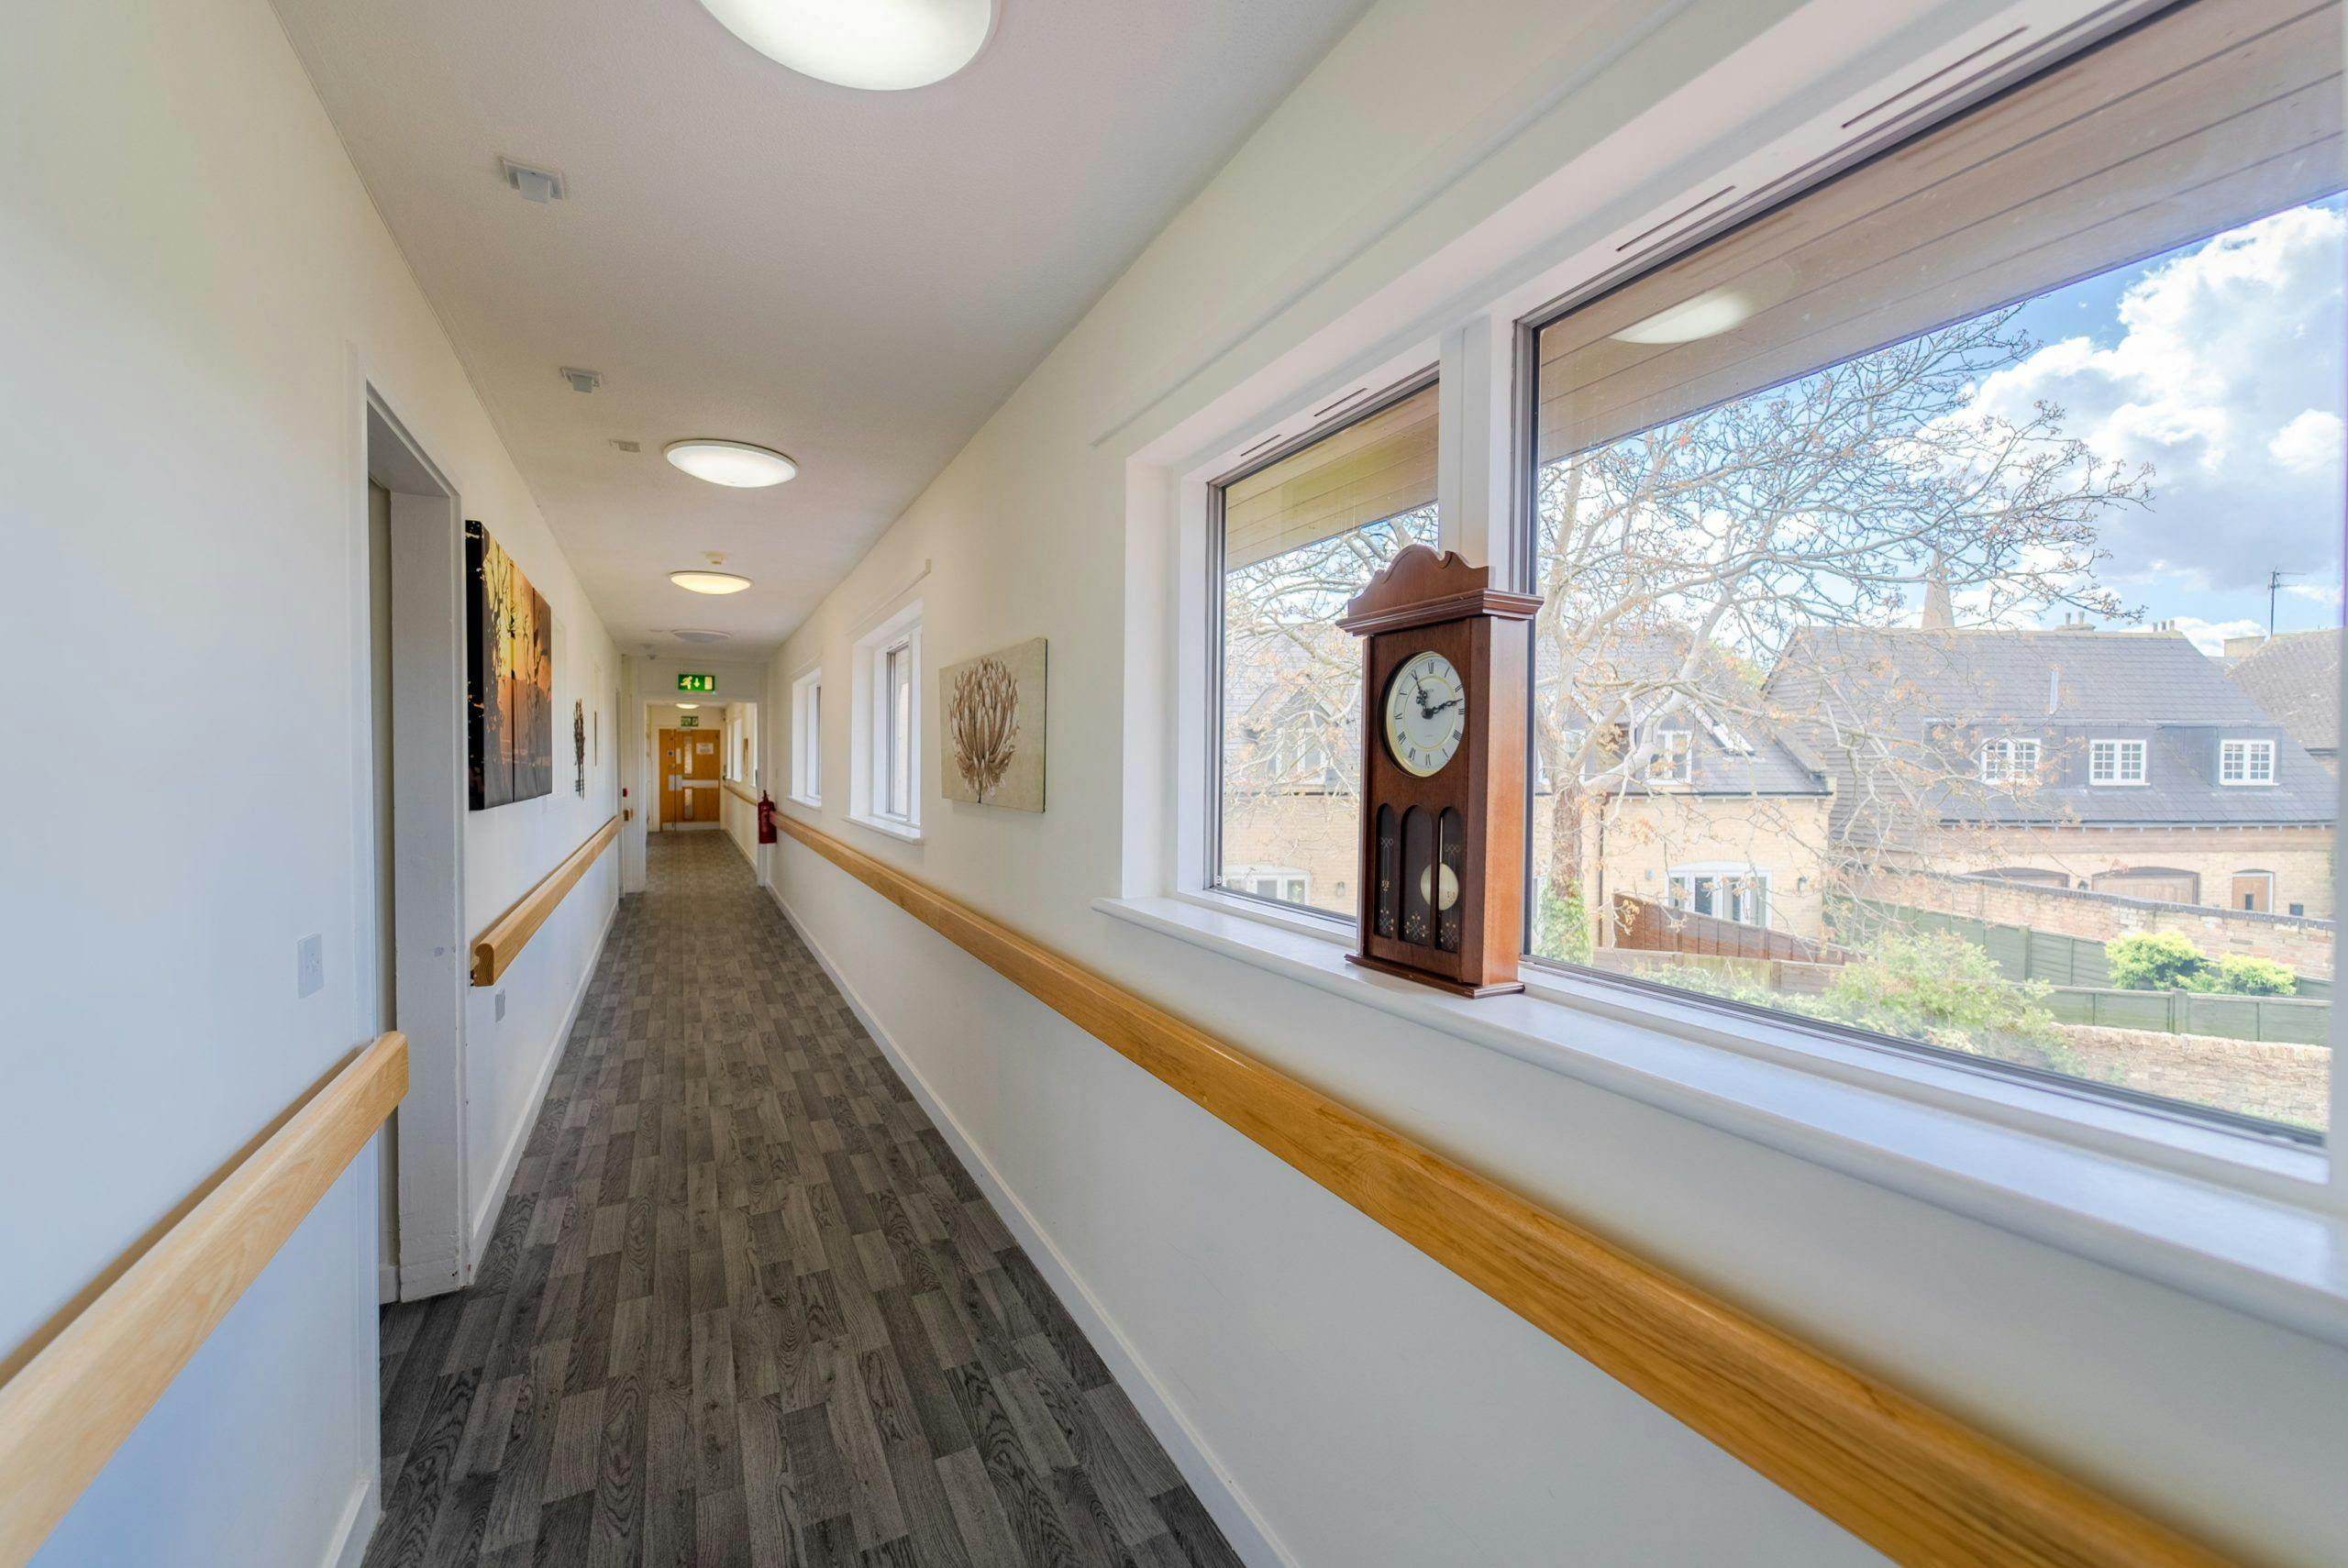 Hallway of Vera James House care home in Ely, Cambridgeshire